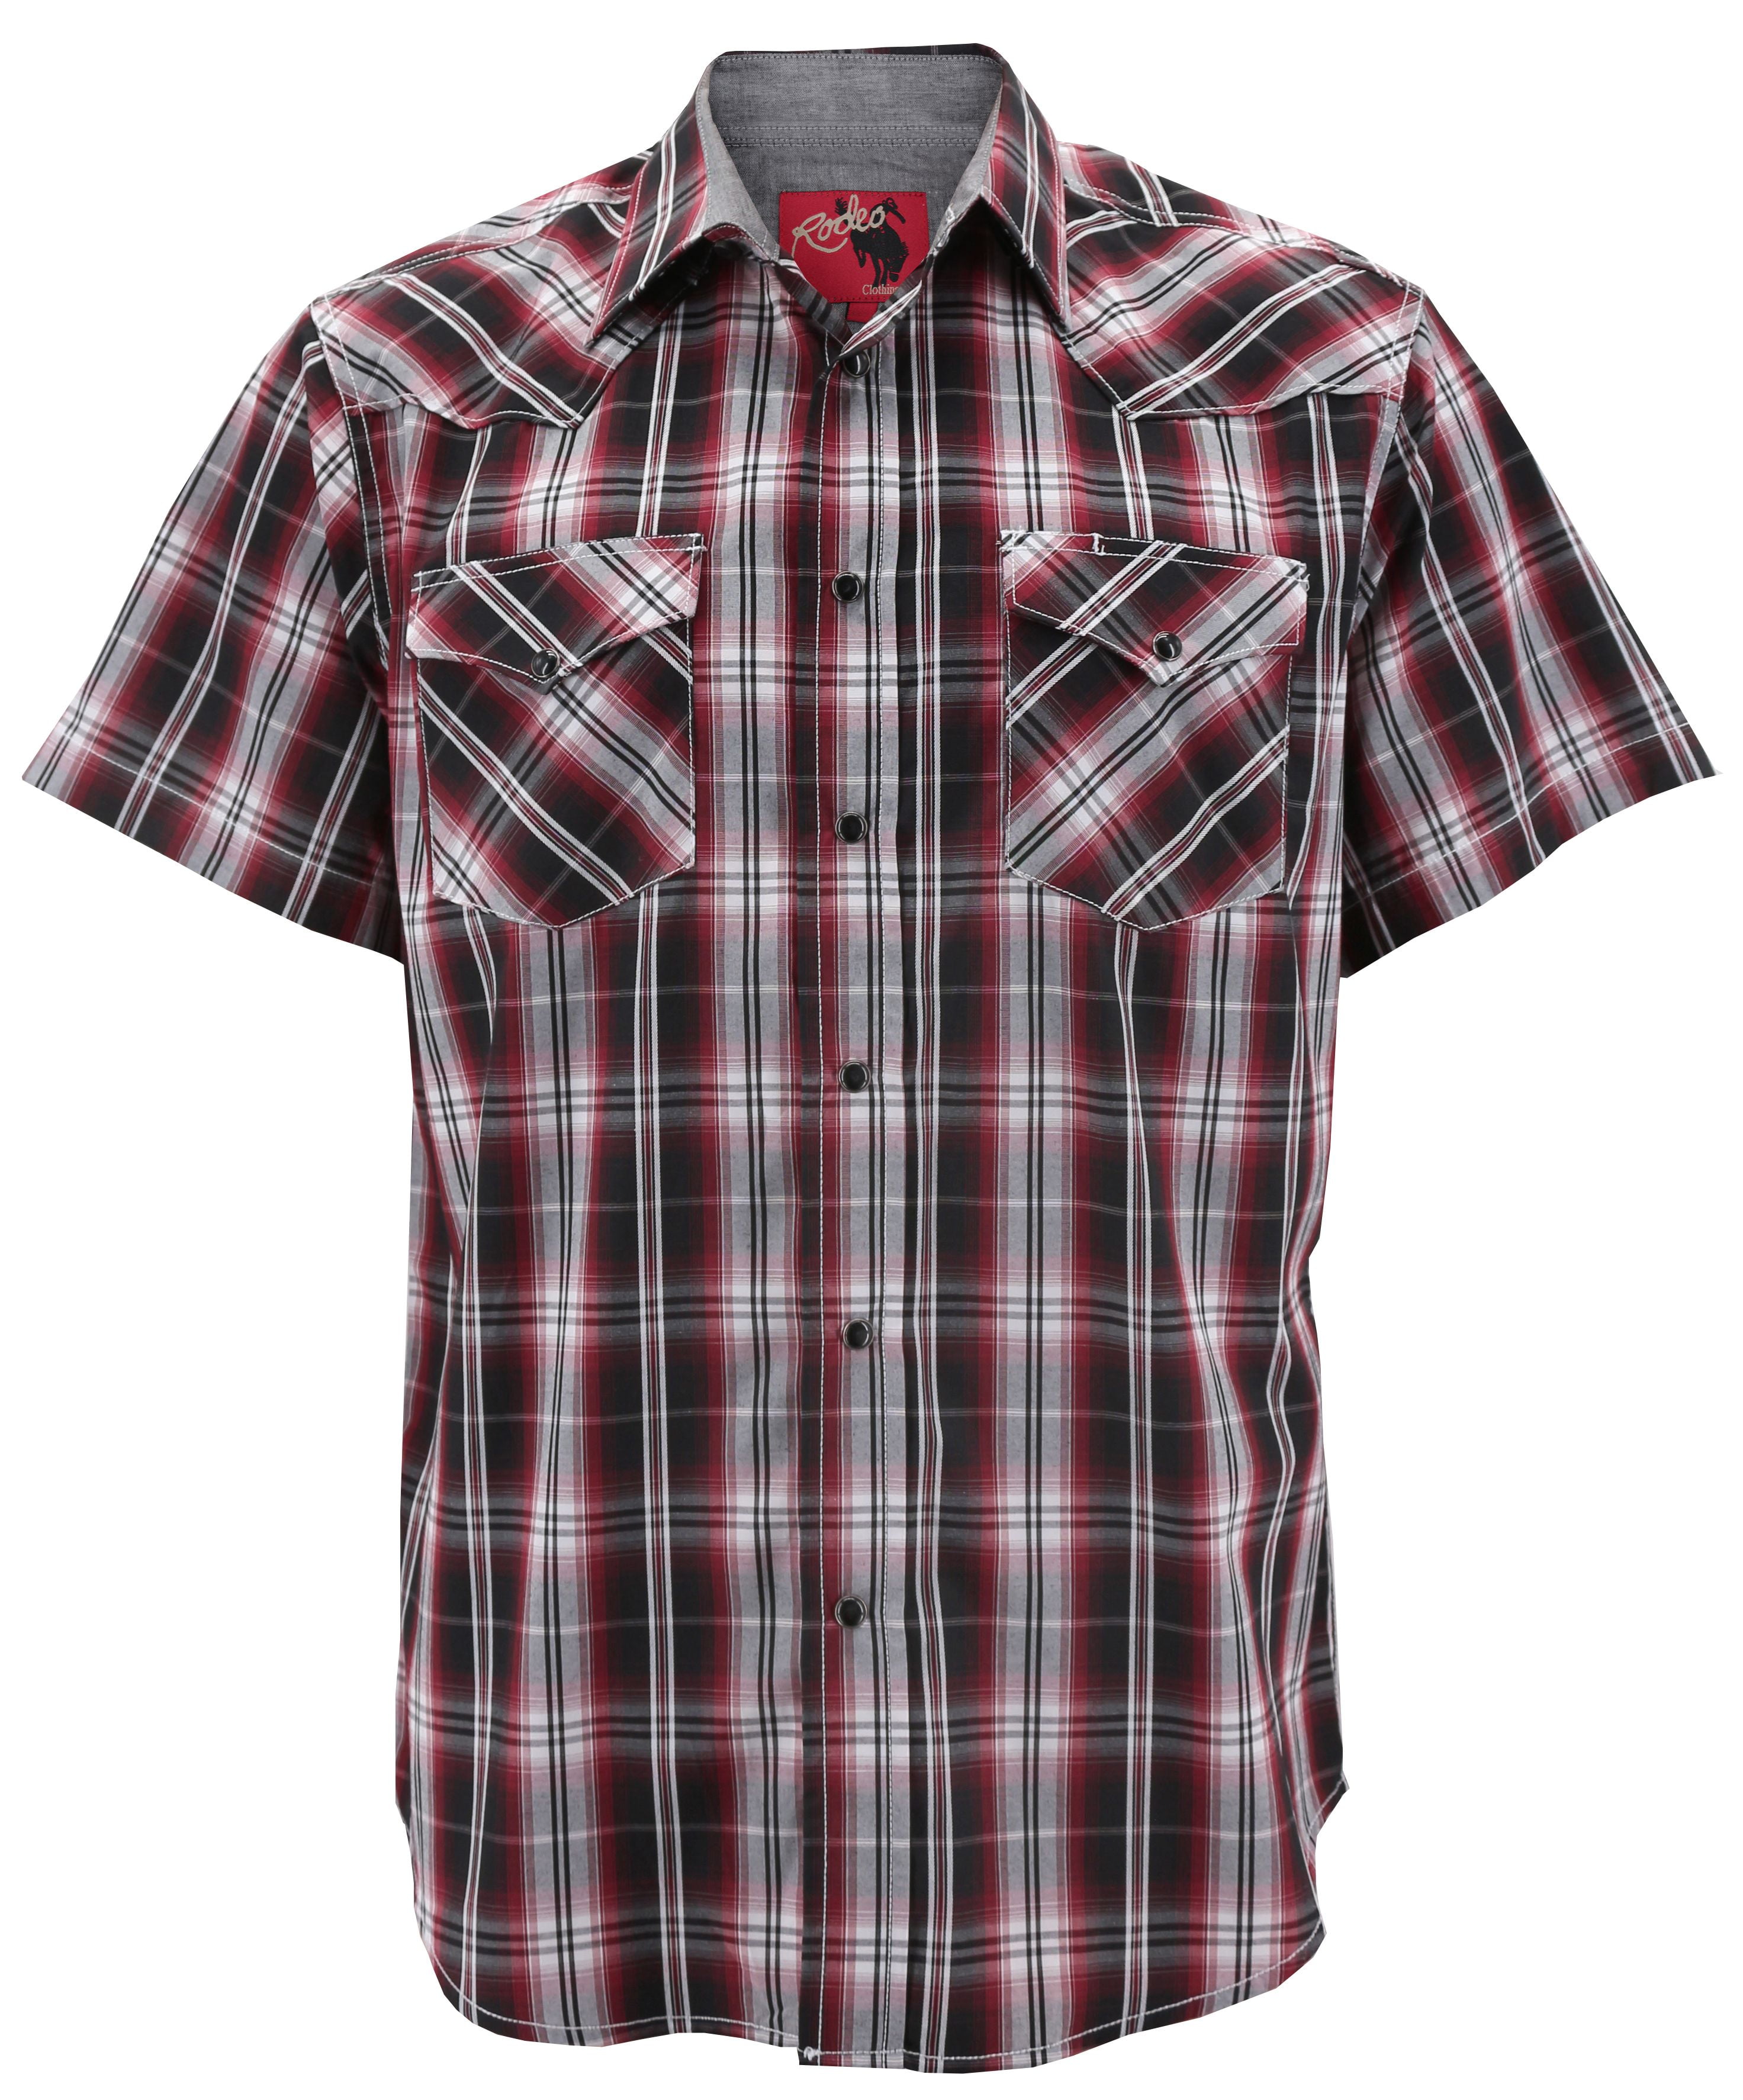 Rodeo Clothing Men's Western Pearl Snap Button Up Short Sleeve Plaid Dress Shirt 